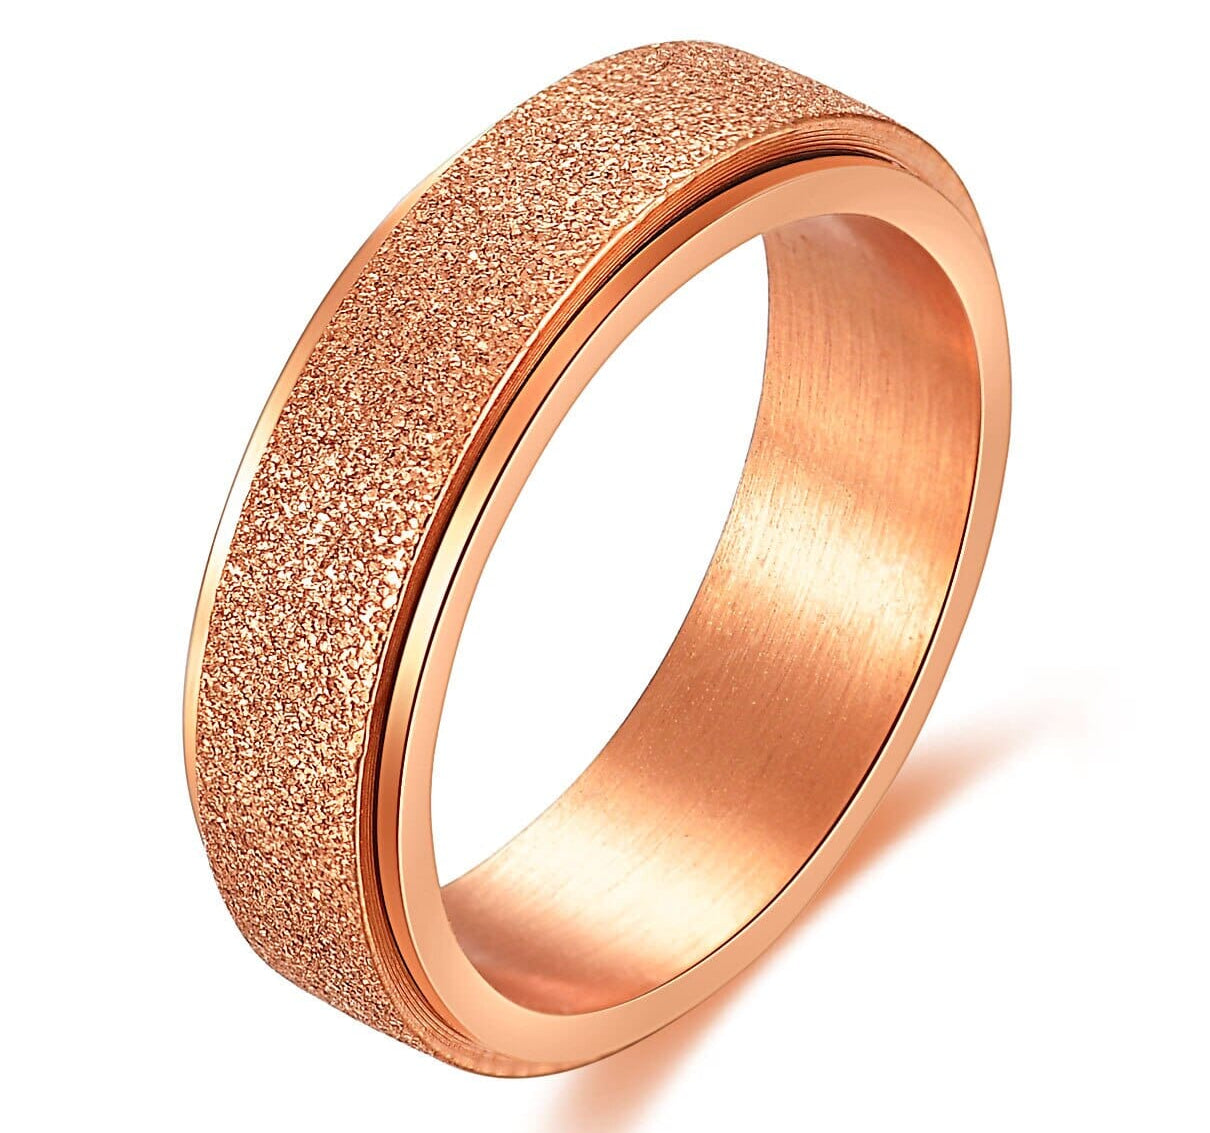 VQYSKO 6MM Anxiety Relief Spinner Ring for Women and Man Stainless Steel Sand Blast Glitter Finish Gold Color Fidget Ring Band 0 The Autistic Innovator Rose 4 